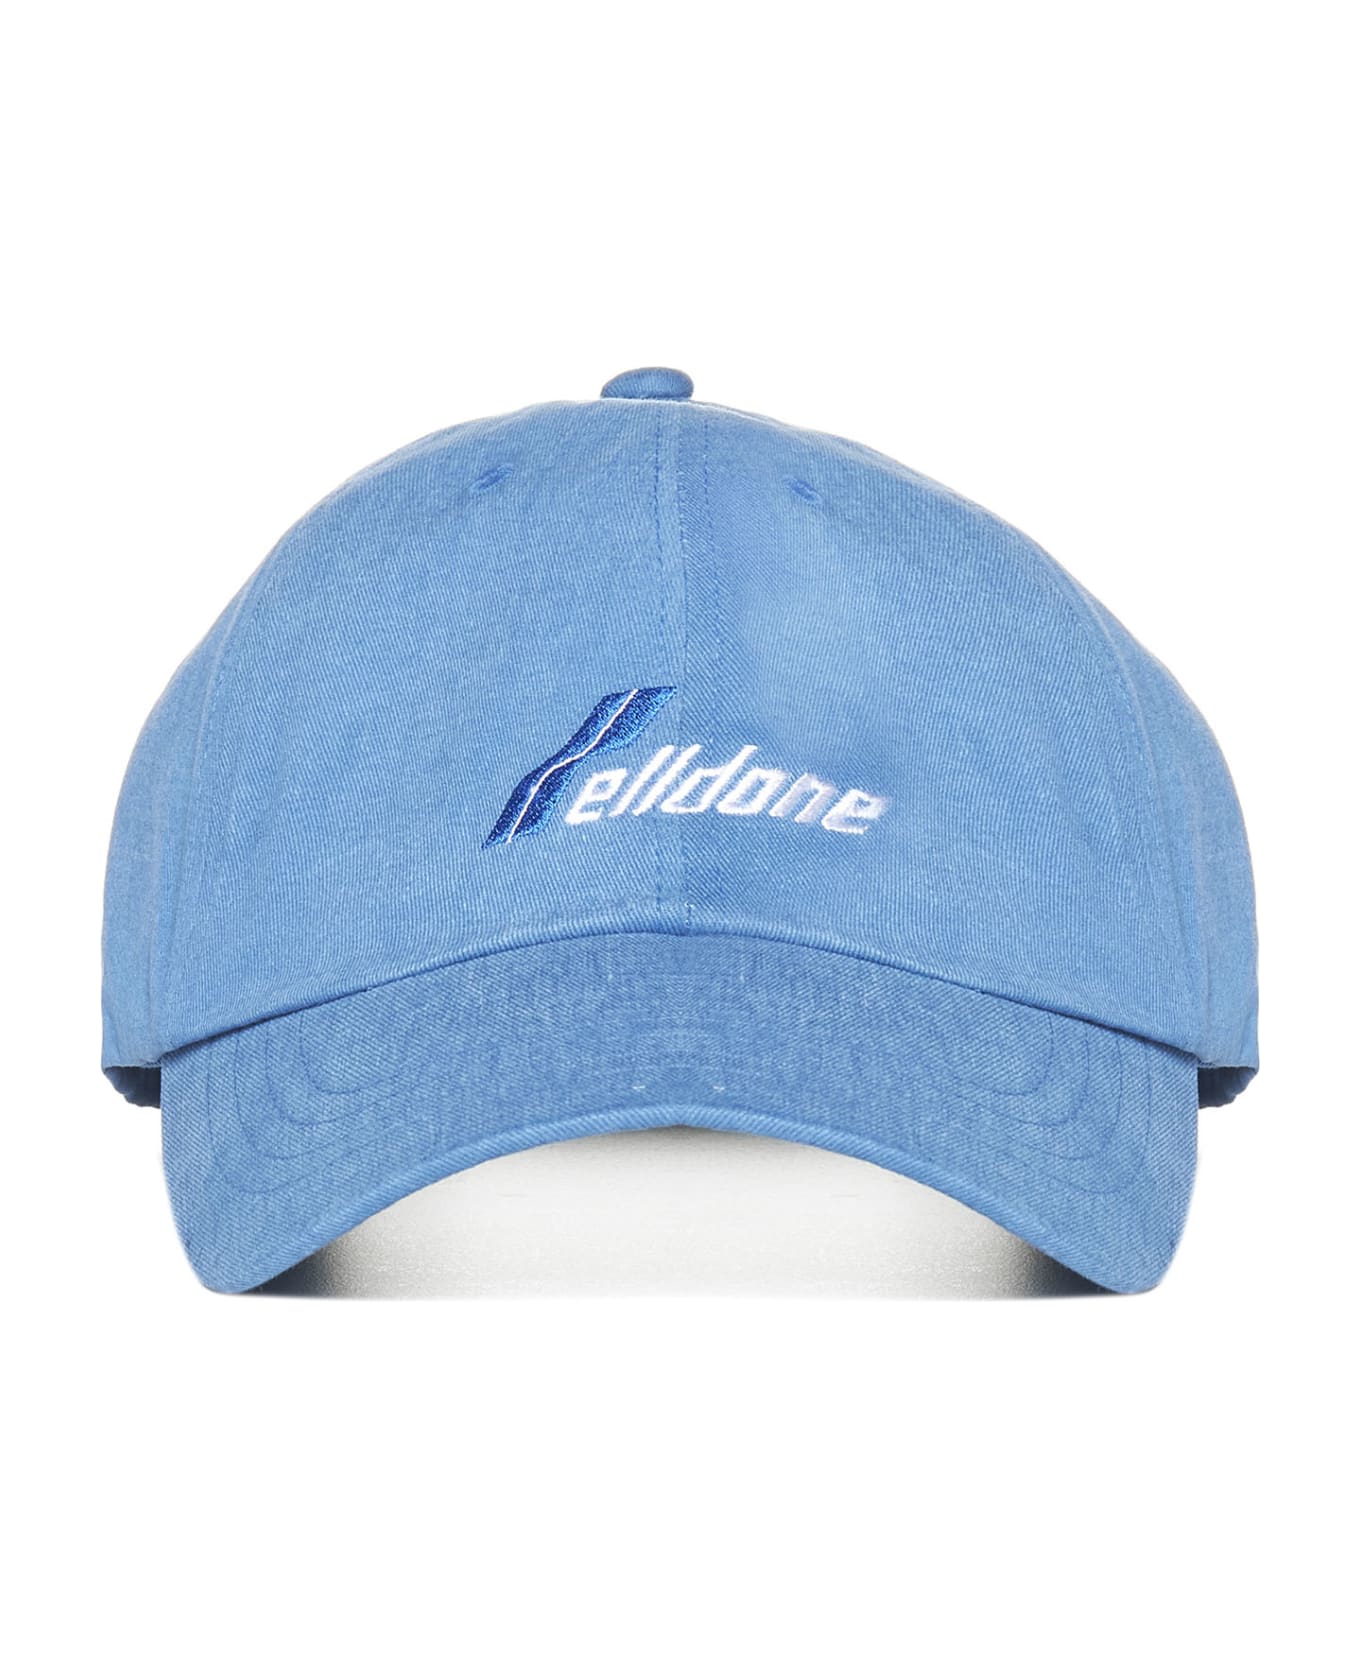 WE11 DONE Hat - Blue